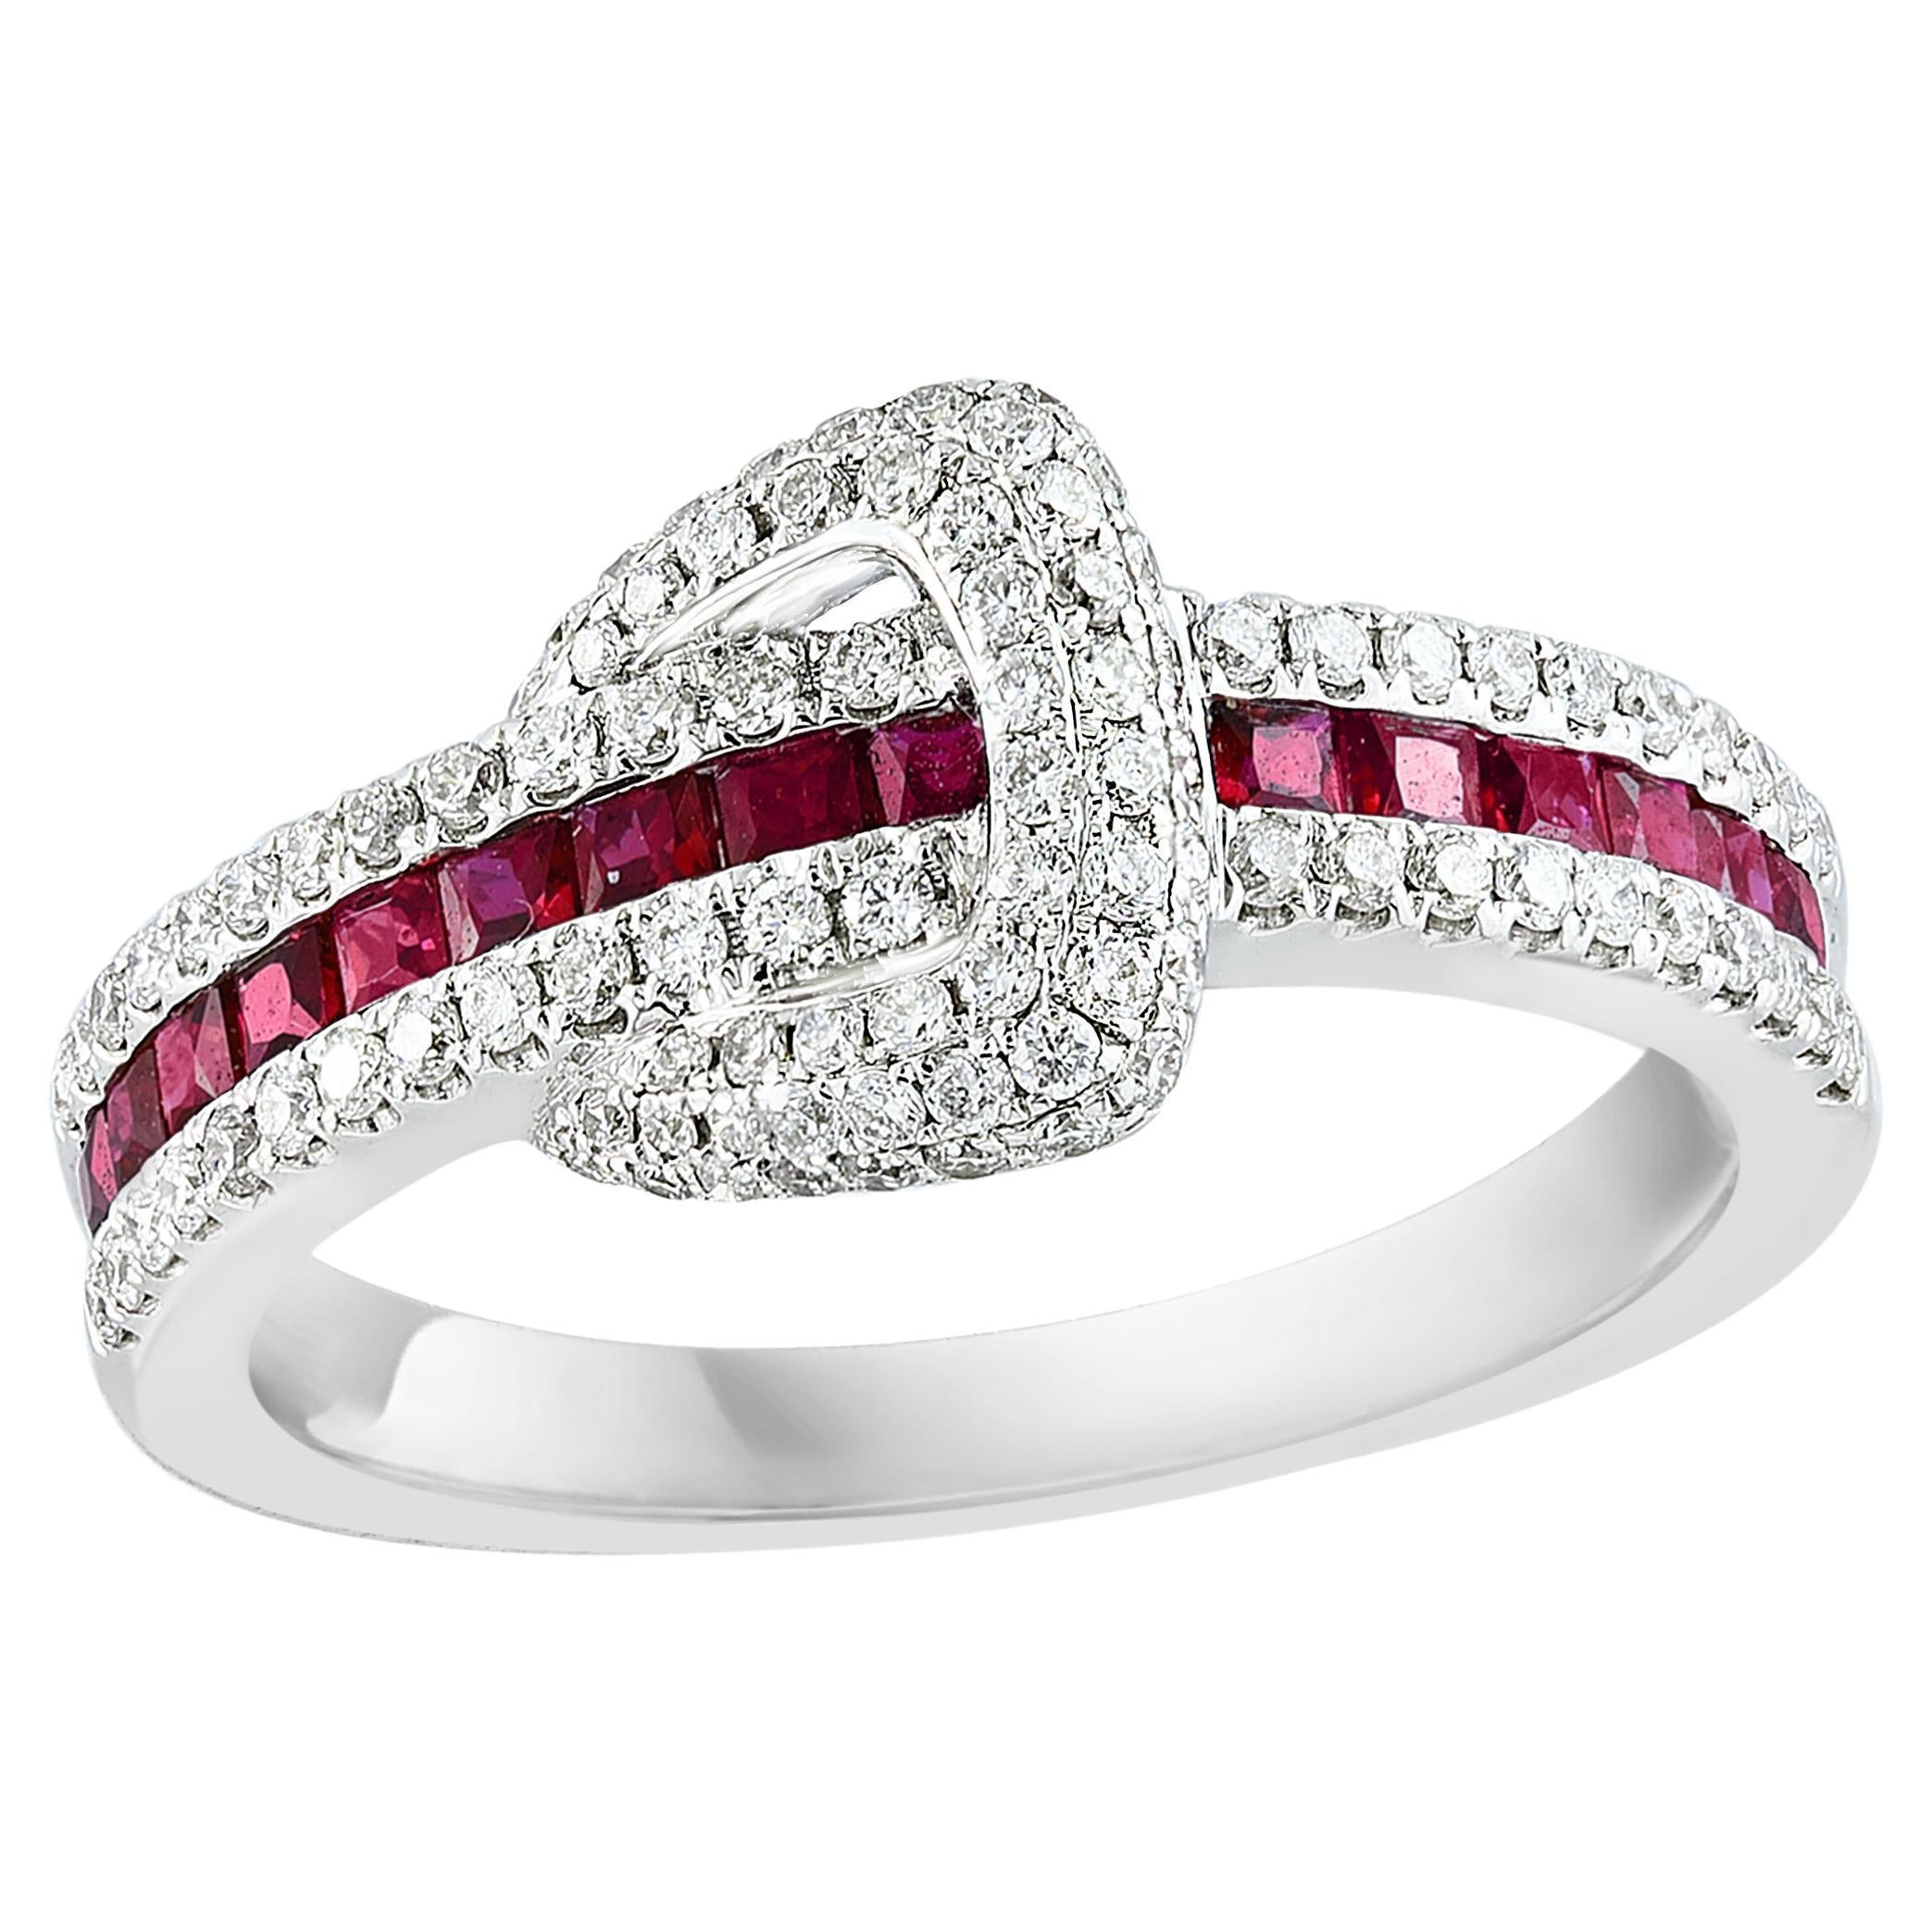 0.57 Carat Princess Cut Ruby and Diamond Band in 18K White Gold